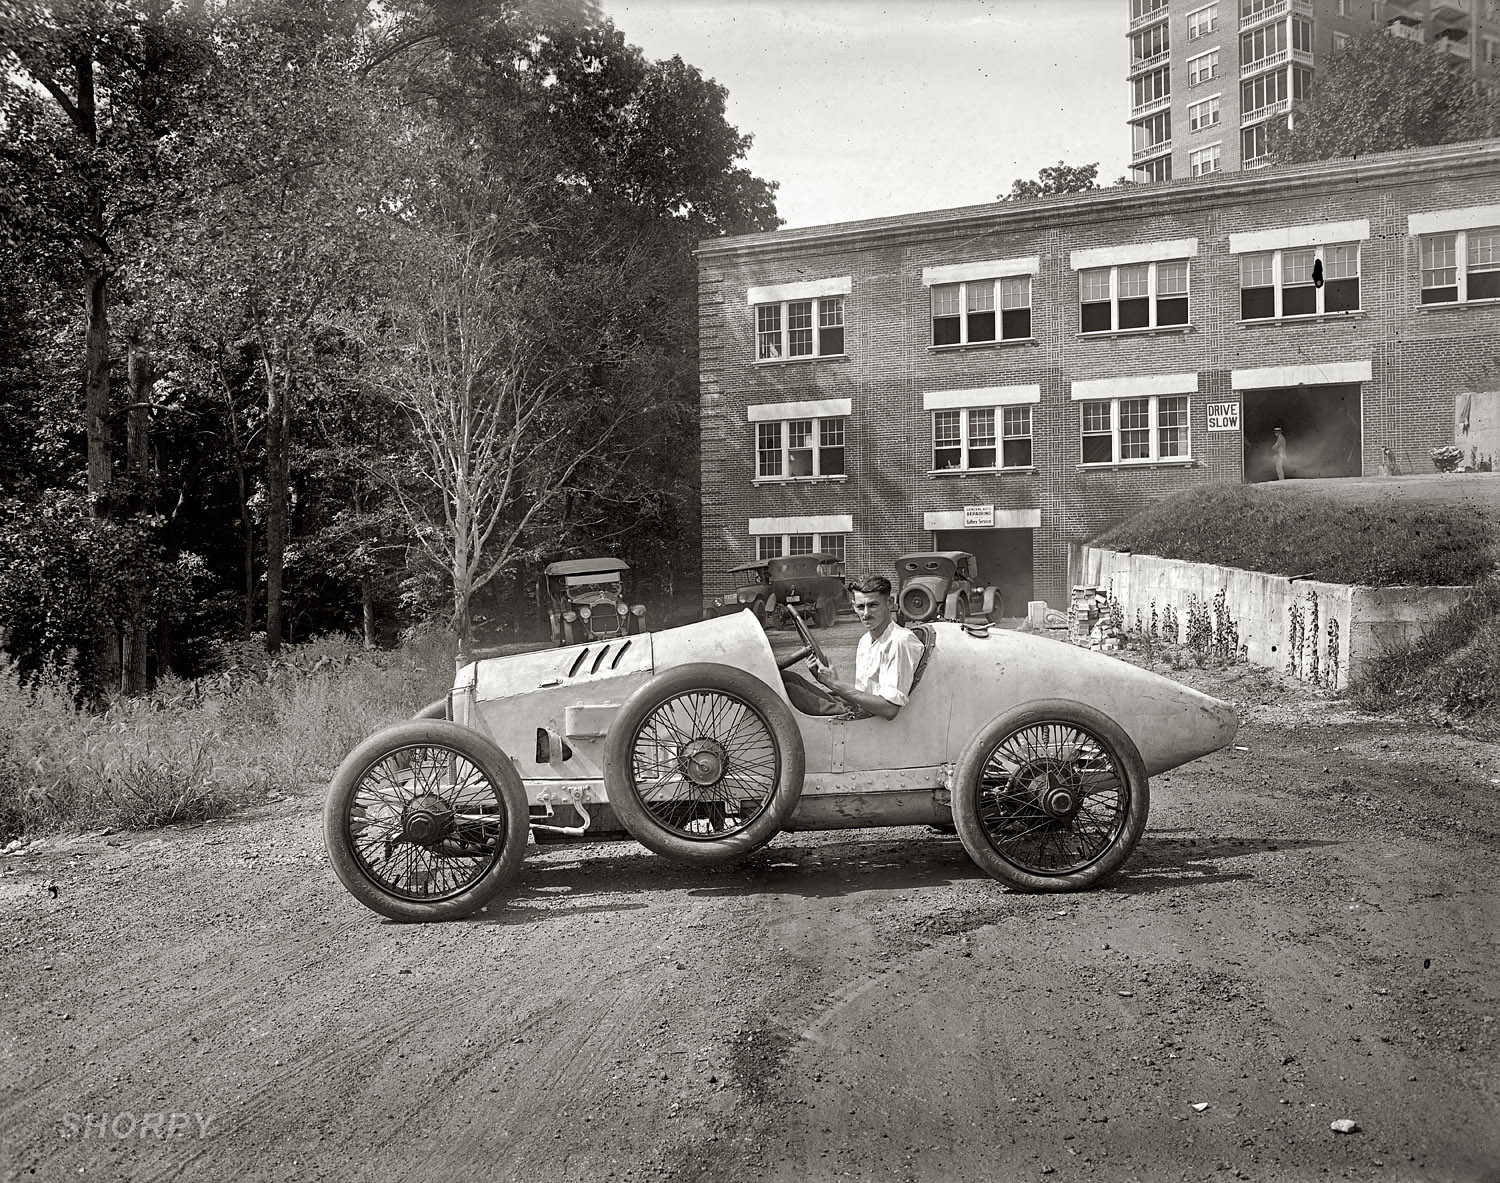 Washington, D.C., 1920. "Donnie Moore in Duesenberg." View full size. National Photo Company Collection glass negative, Library of Congress.